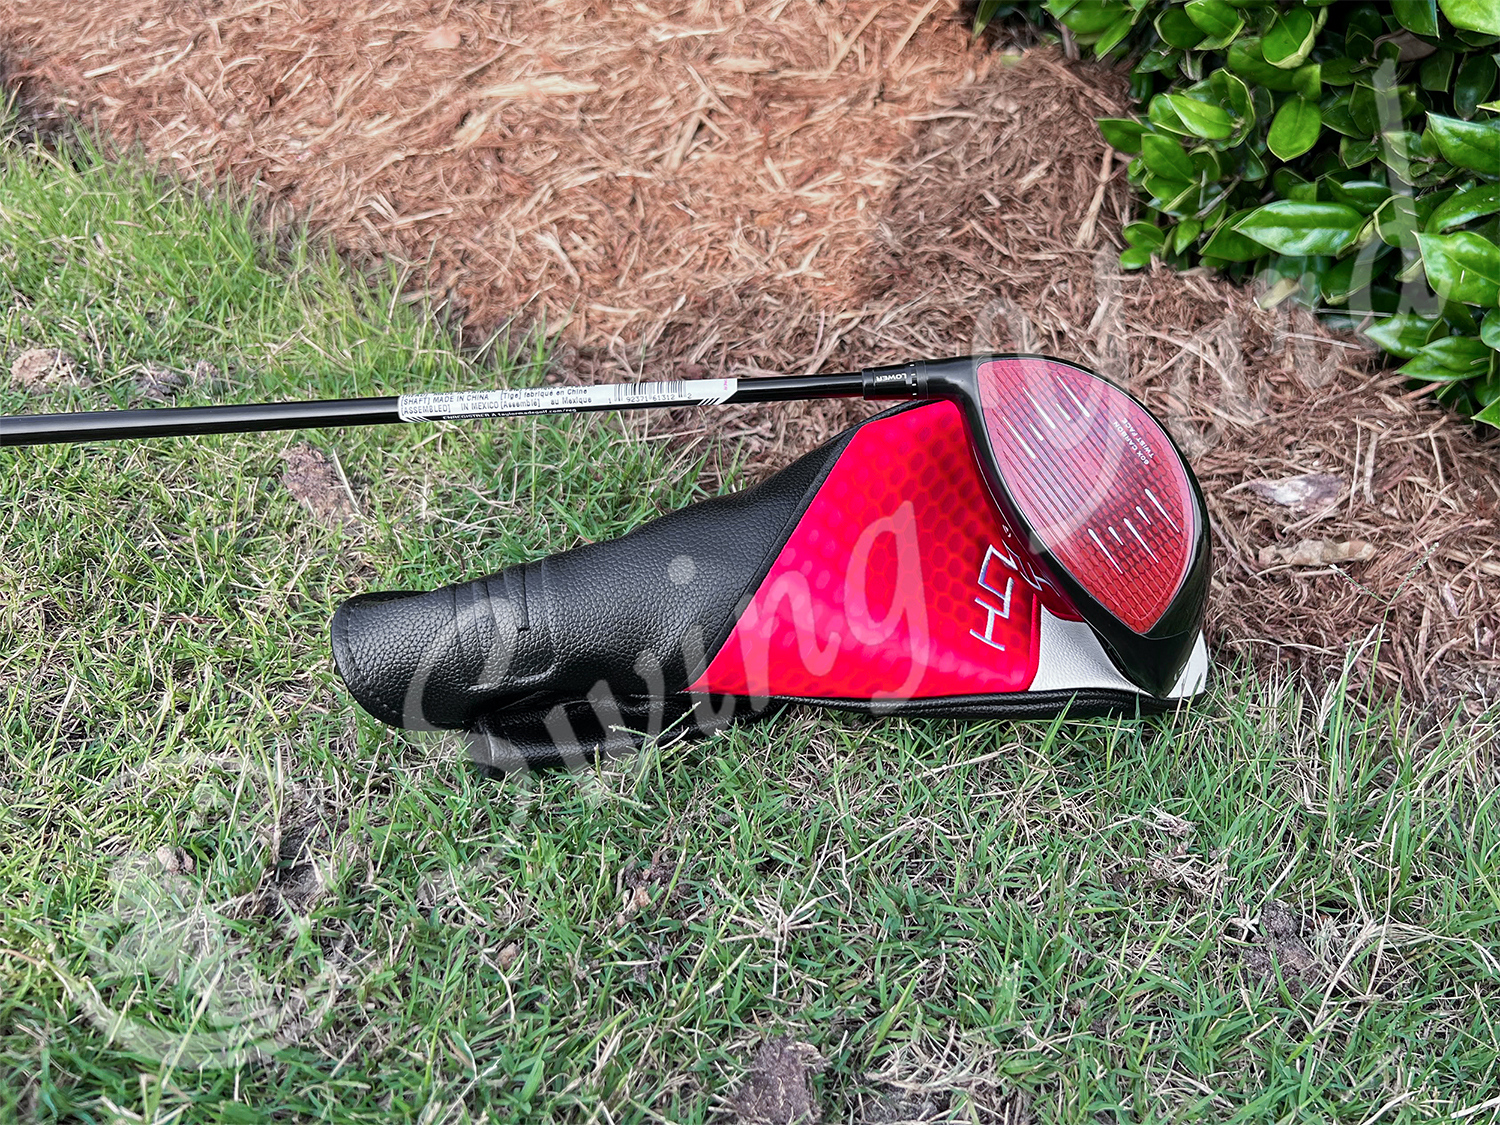 A 60X Carbon Twist face of a new TaylorMade Stealth 2 driver